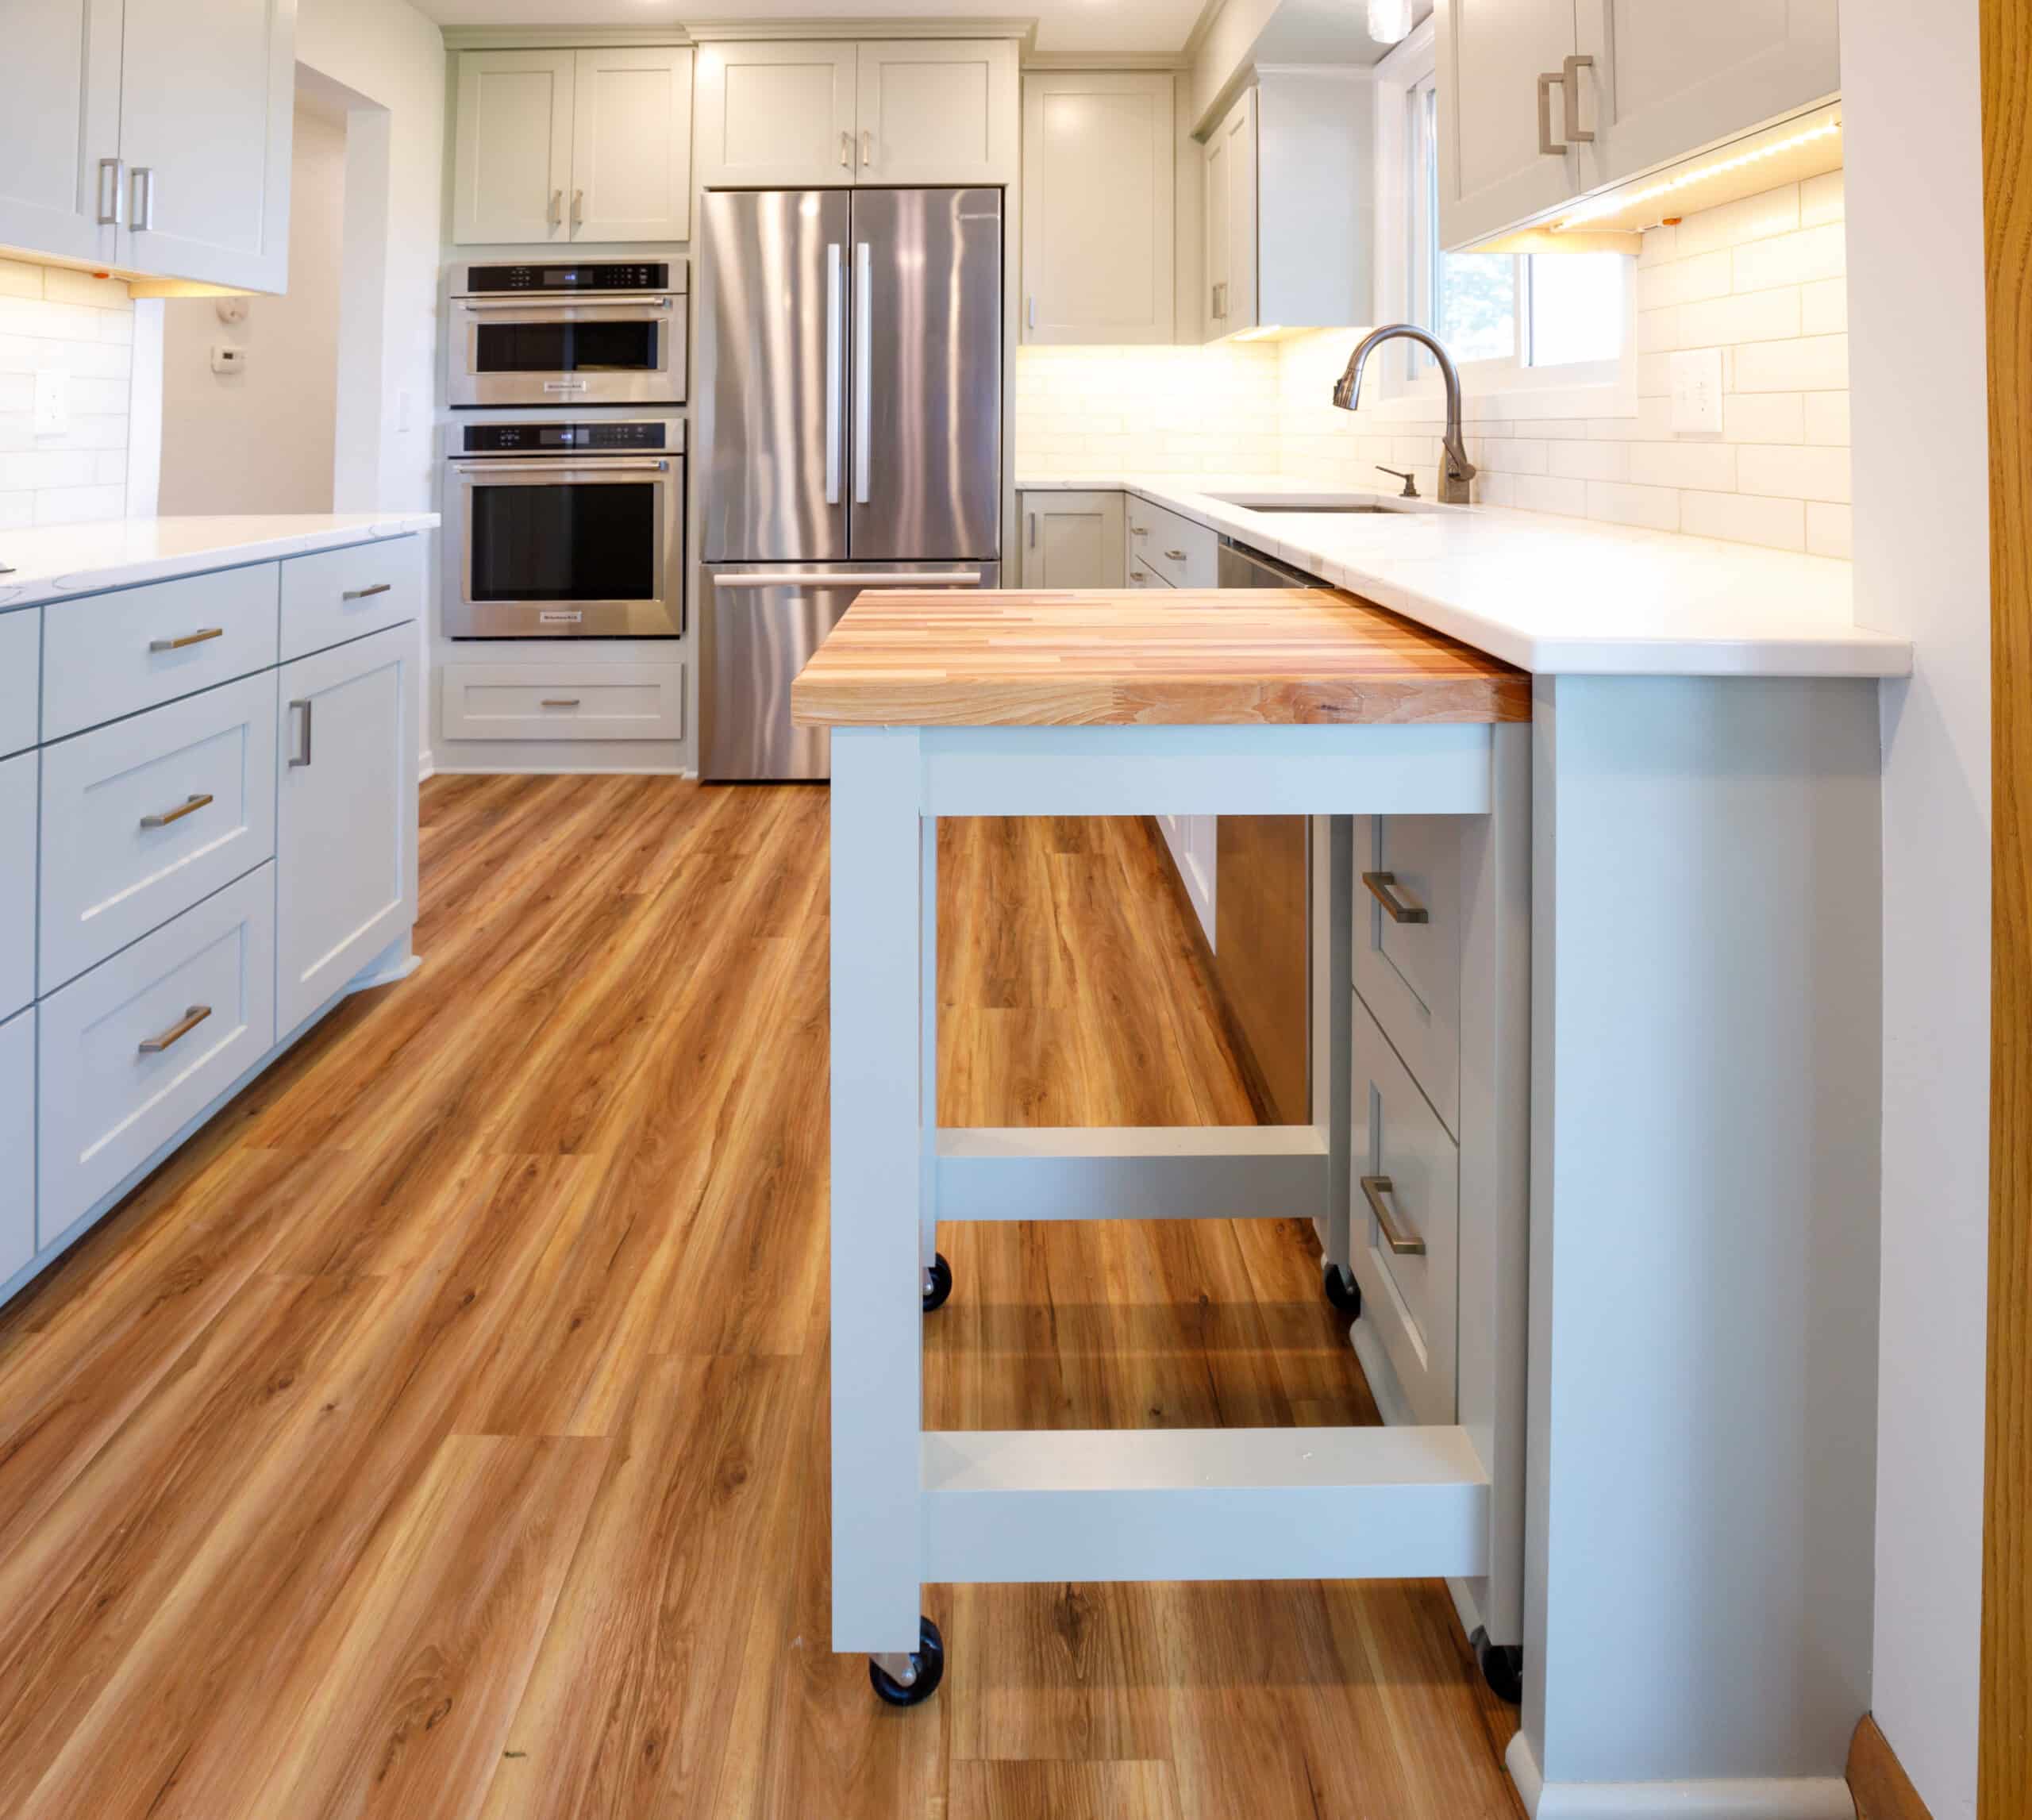 Custom butcher block kitchen cabinet pull-out